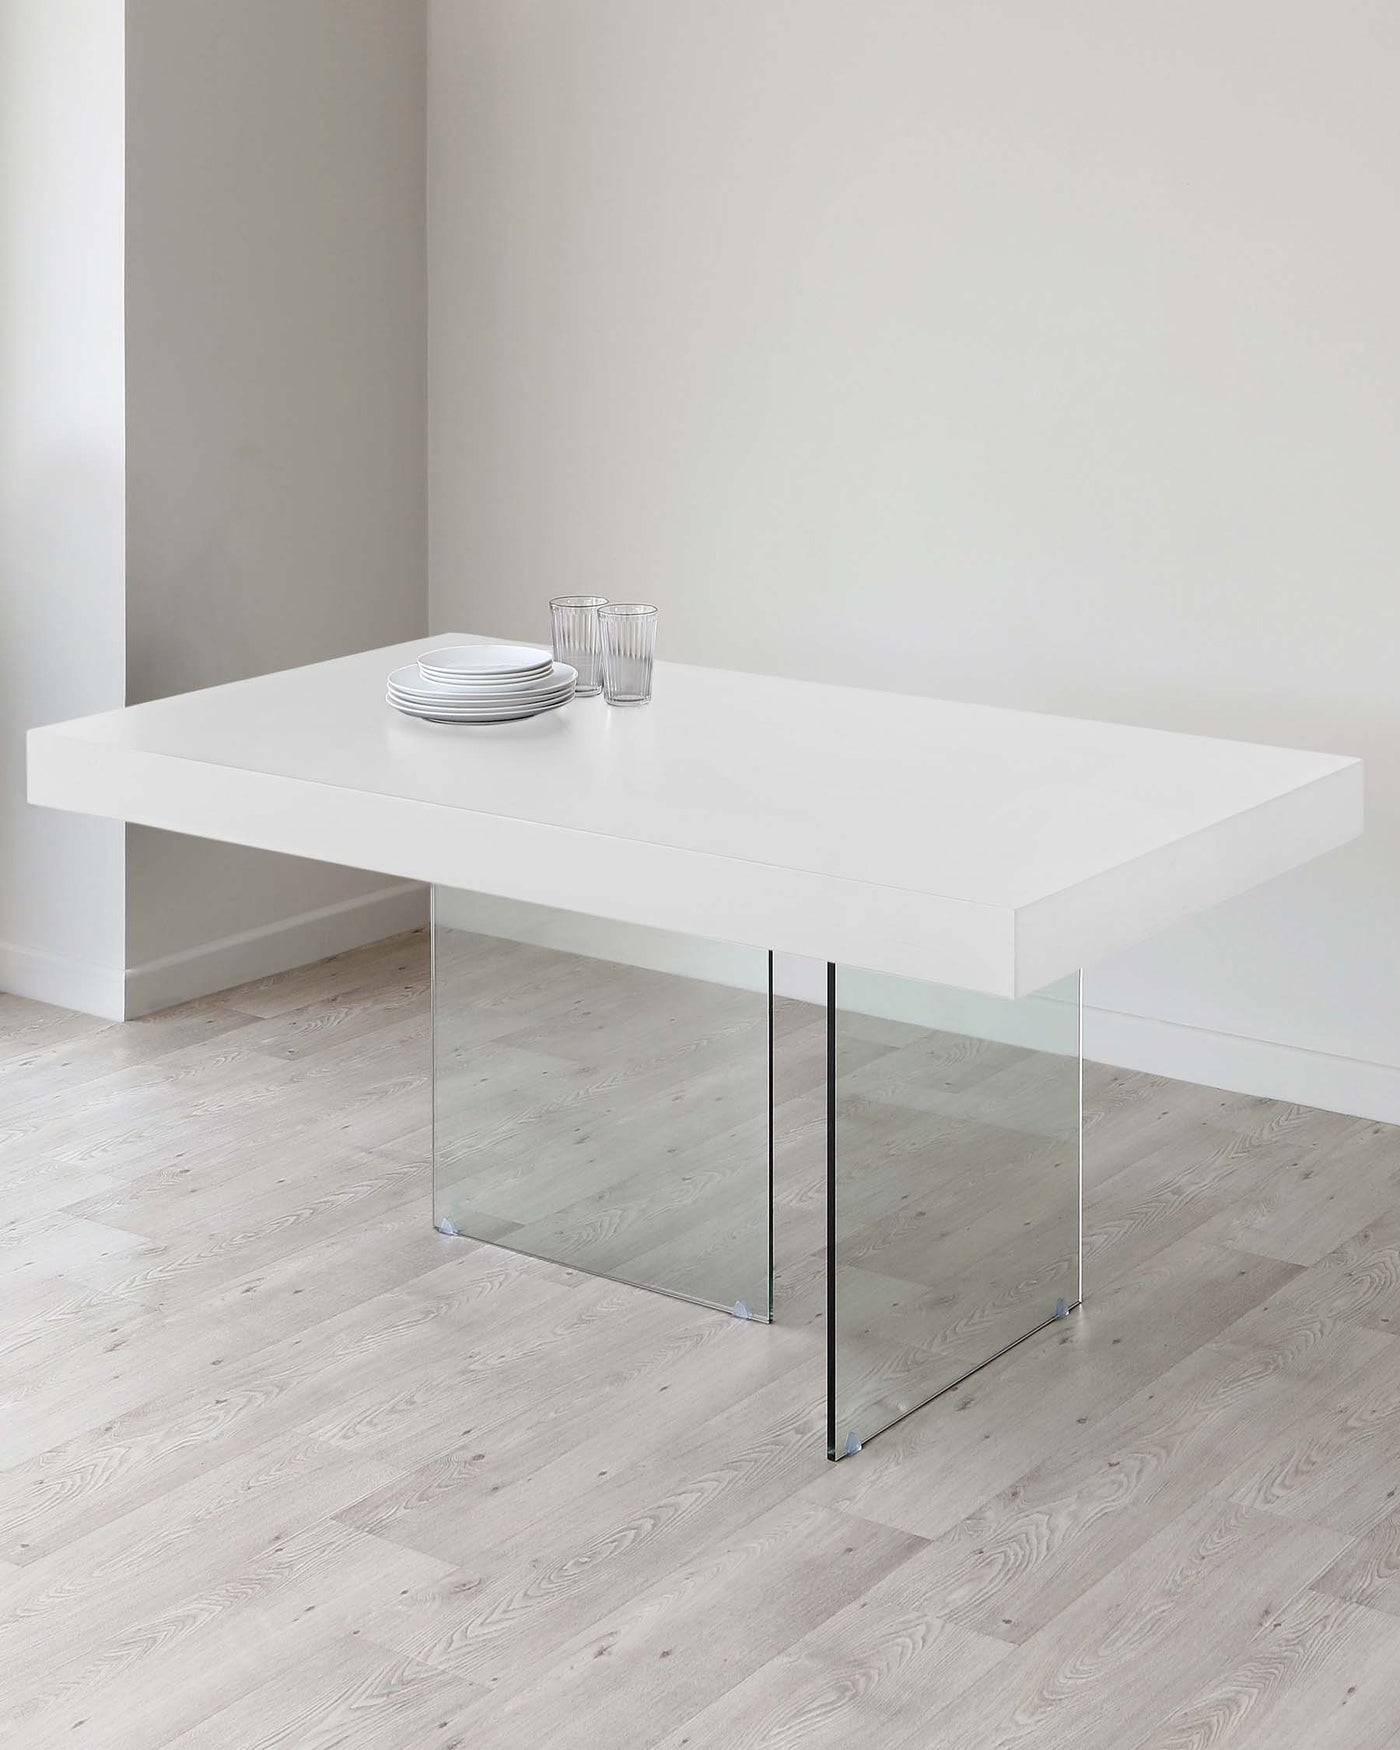 Modern minimalist white dining table with a sleek, rectangular top supported by a singular polished chrome pedestal on one end and a glass slab on the other, set against a clean, neutral background.